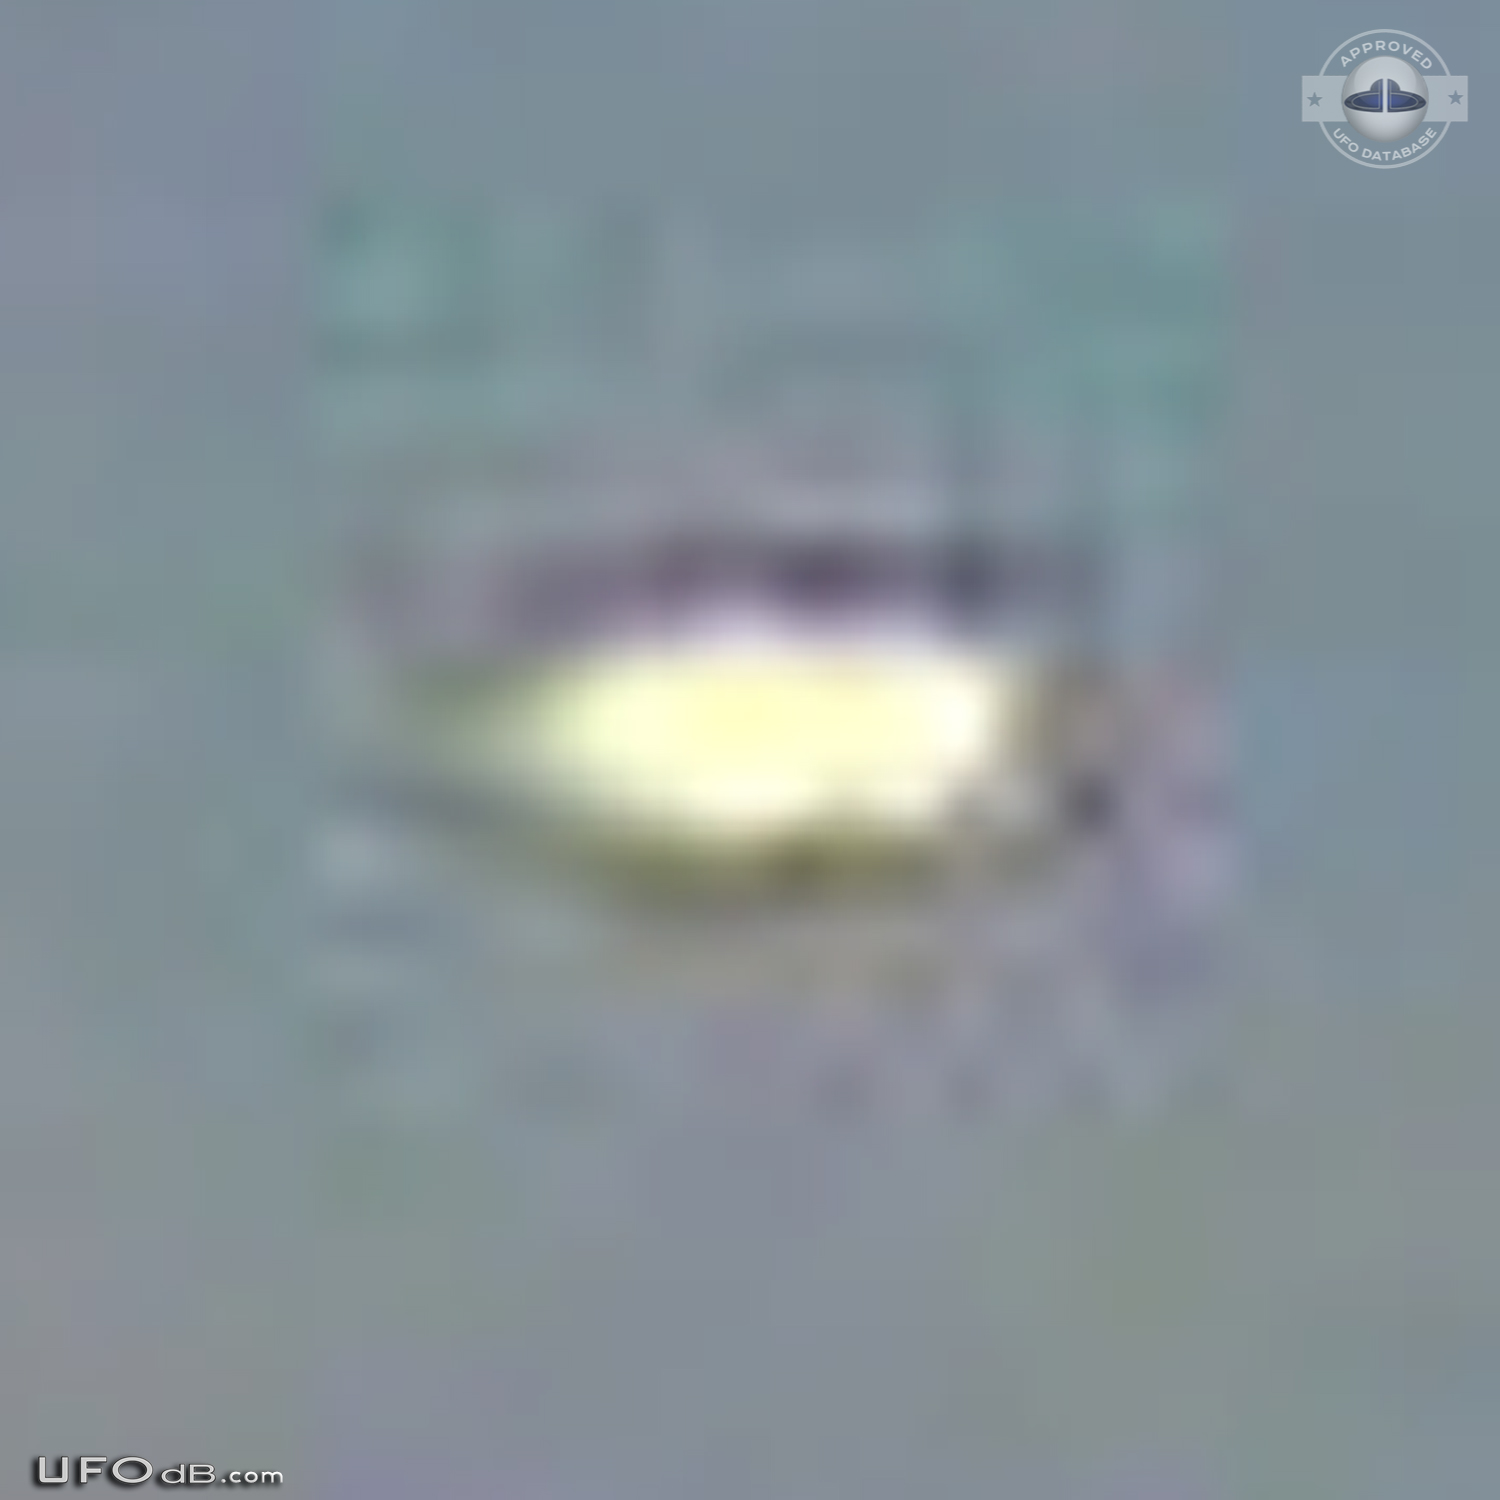 Friends Picture reveals UFO over Buenos Aires in Argentina May 2009 UFO Picture #607-6